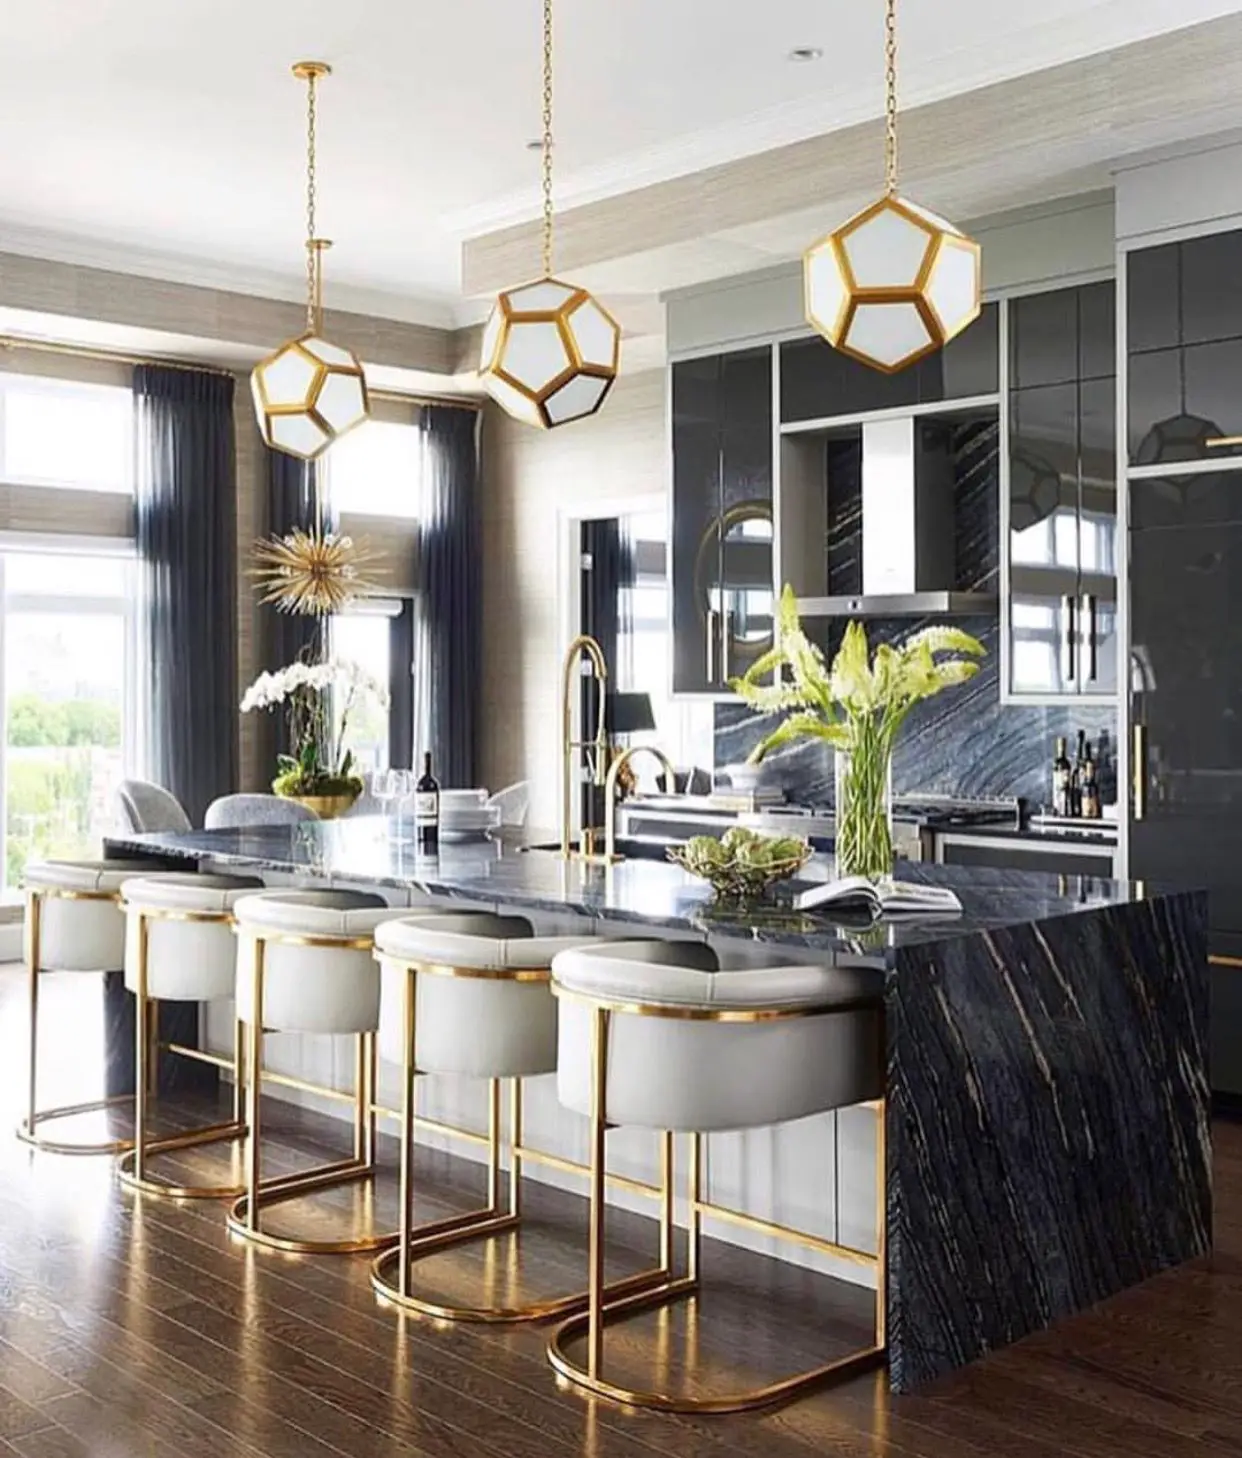 Black and gold kitchen